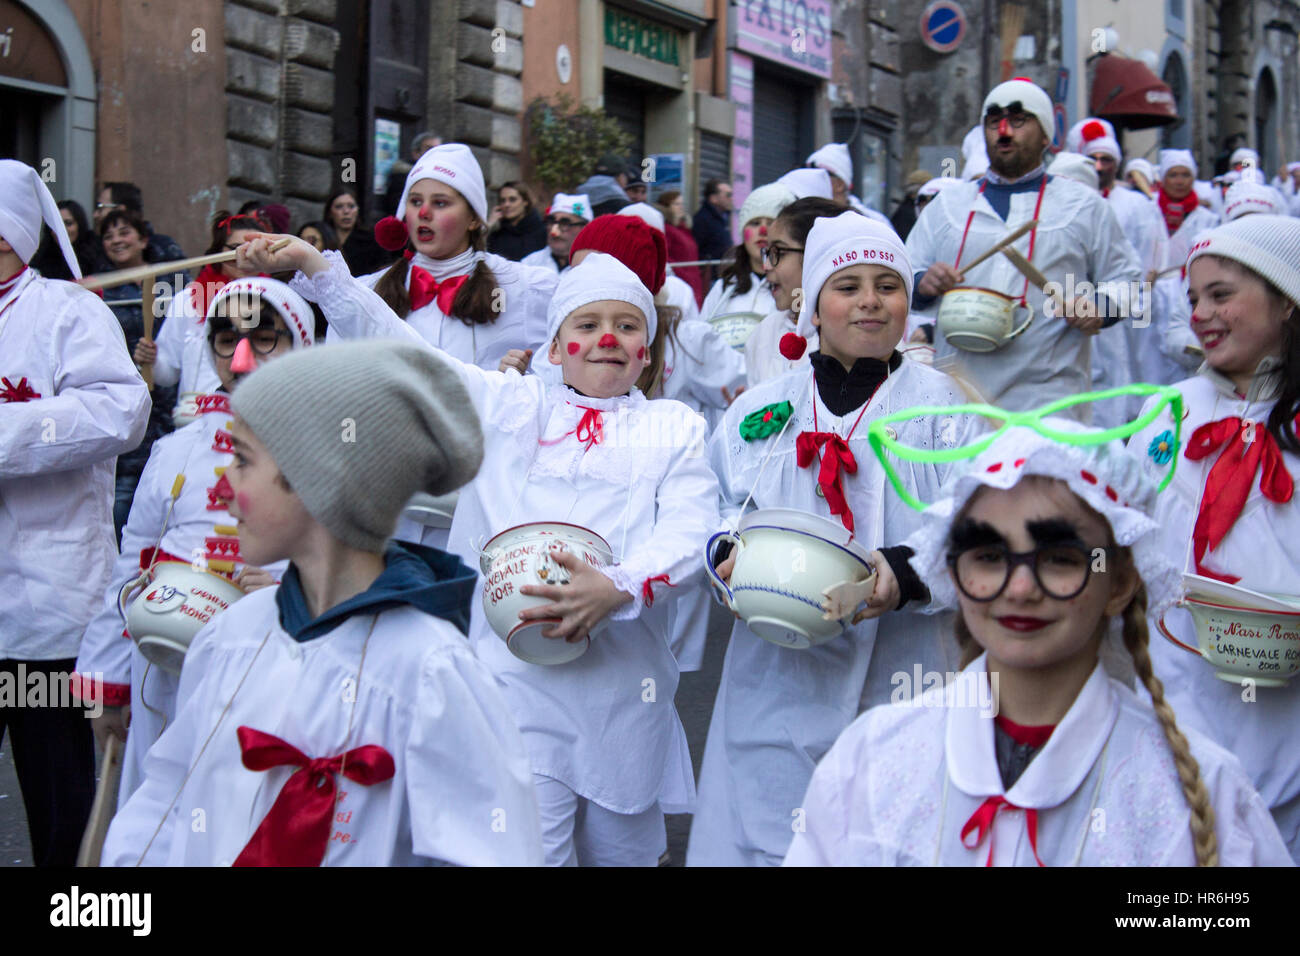 Ronciglione, Italy. 27th Feb, 2017. The red nose is a historic carnival mask of Ronciglione town. The red noses are night dresses with sattana and cap and roam the city with a full chamber pot of rigatoni with sauce that give citizens. Credit: Elisa Bianchini/Pacific Press/Alamy Live News Stock Photo